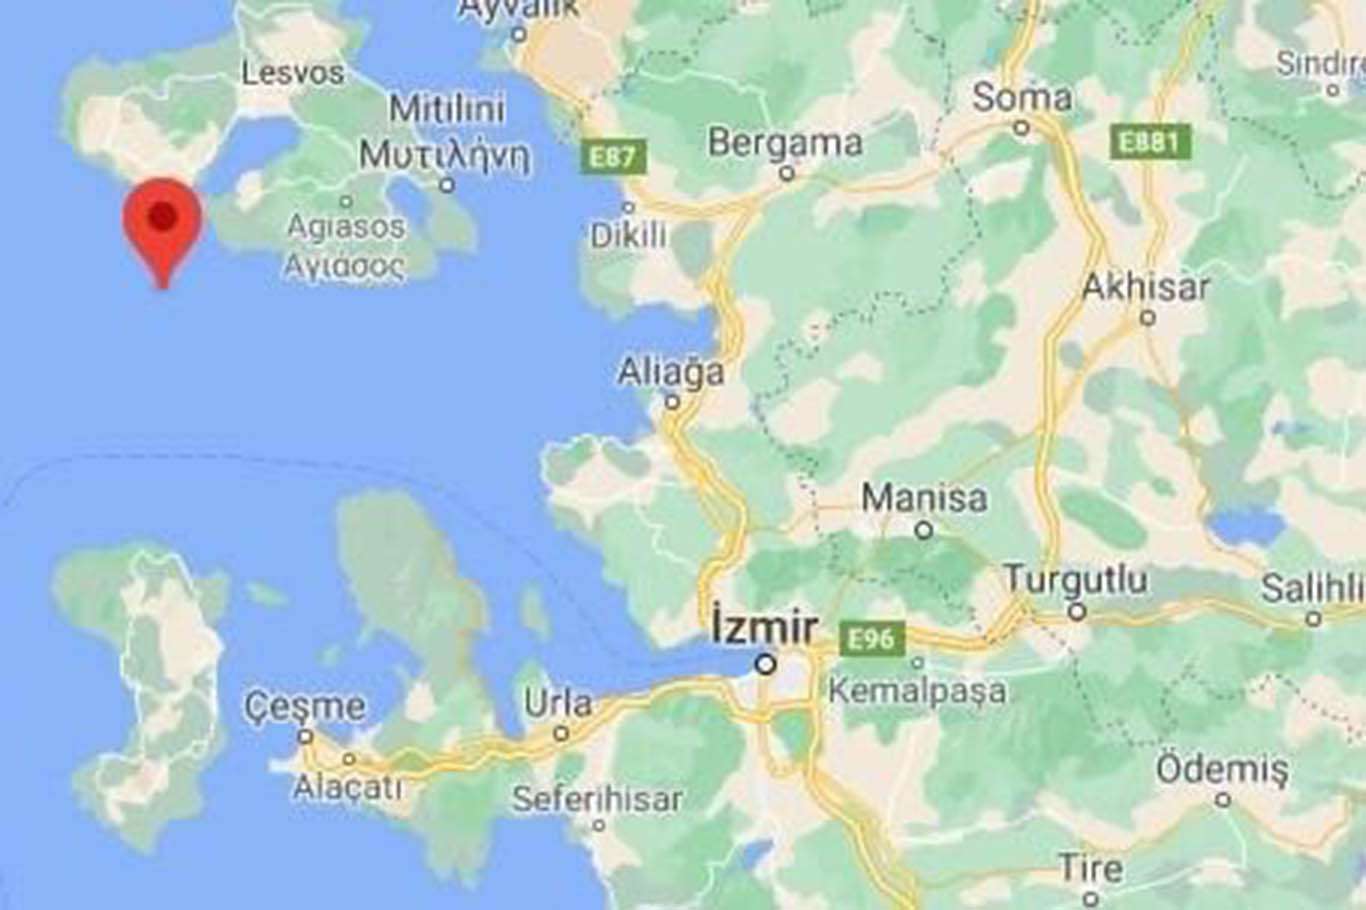 A series of aftershocks jolts western Turkey minutes after a magnitude 5.1 earthquake